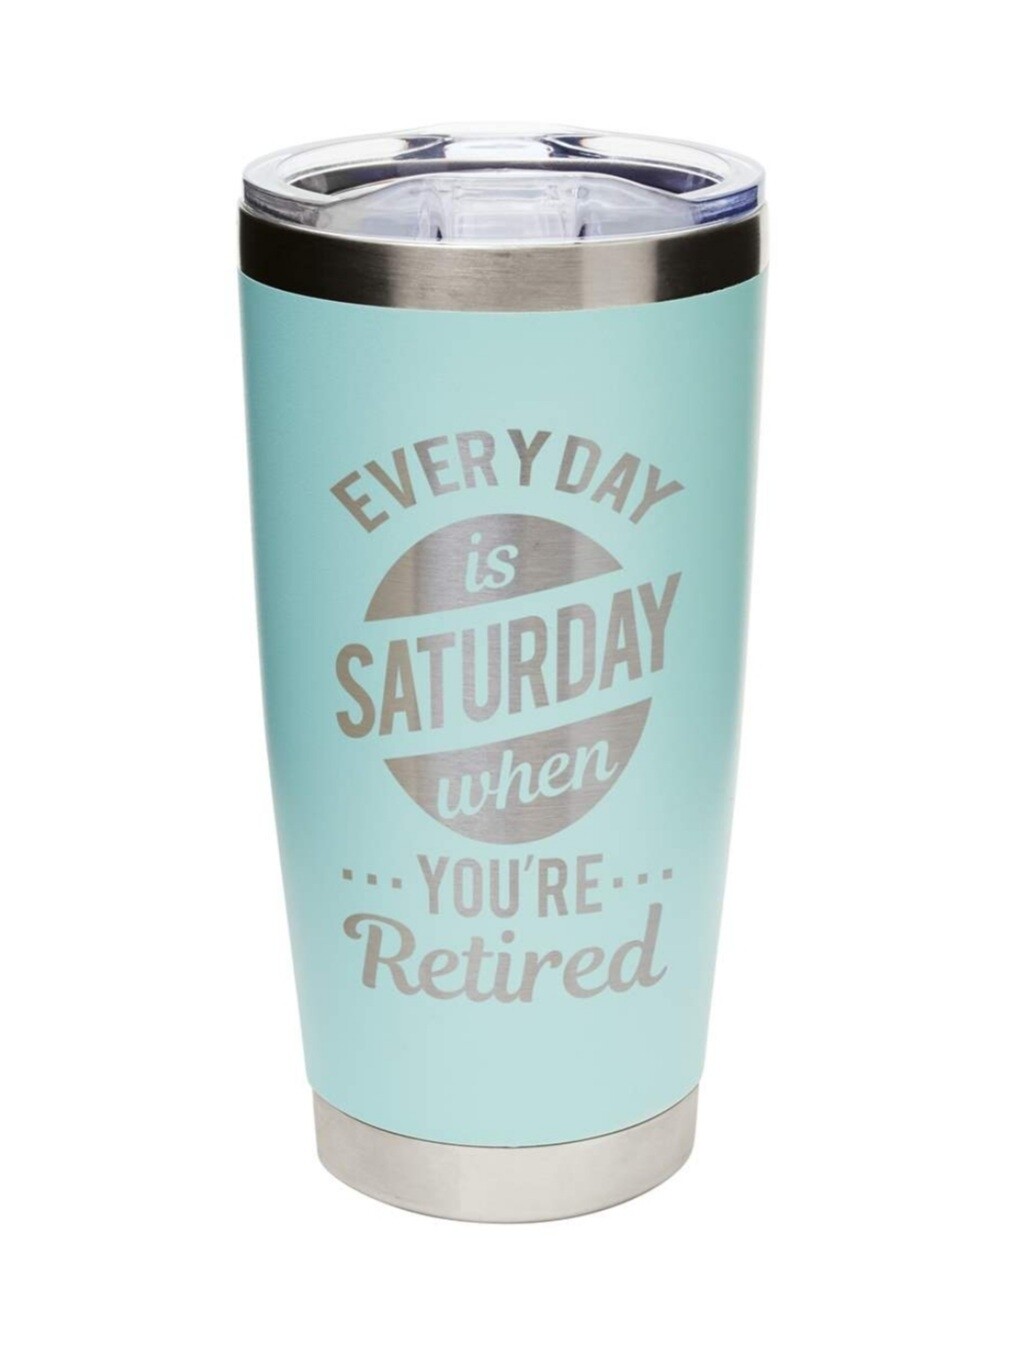 Carson 20oz Stainless Steel Tumbler - Everyday is Saturday when your Retired (Seafoam)